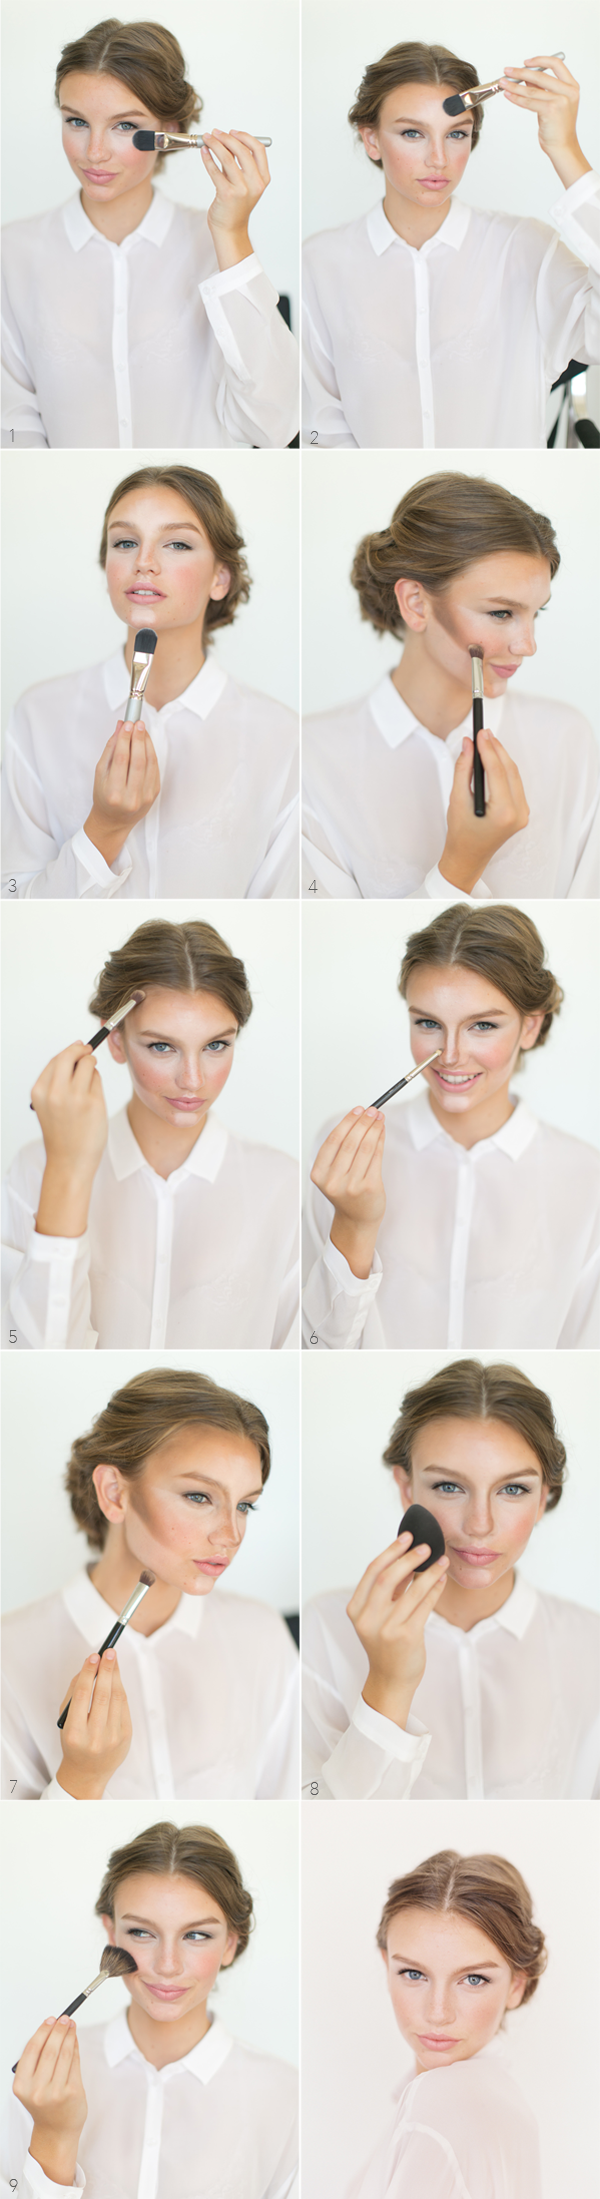 Useful Makeup Tutorials for Sophisticated Looks: Kissable Complexion